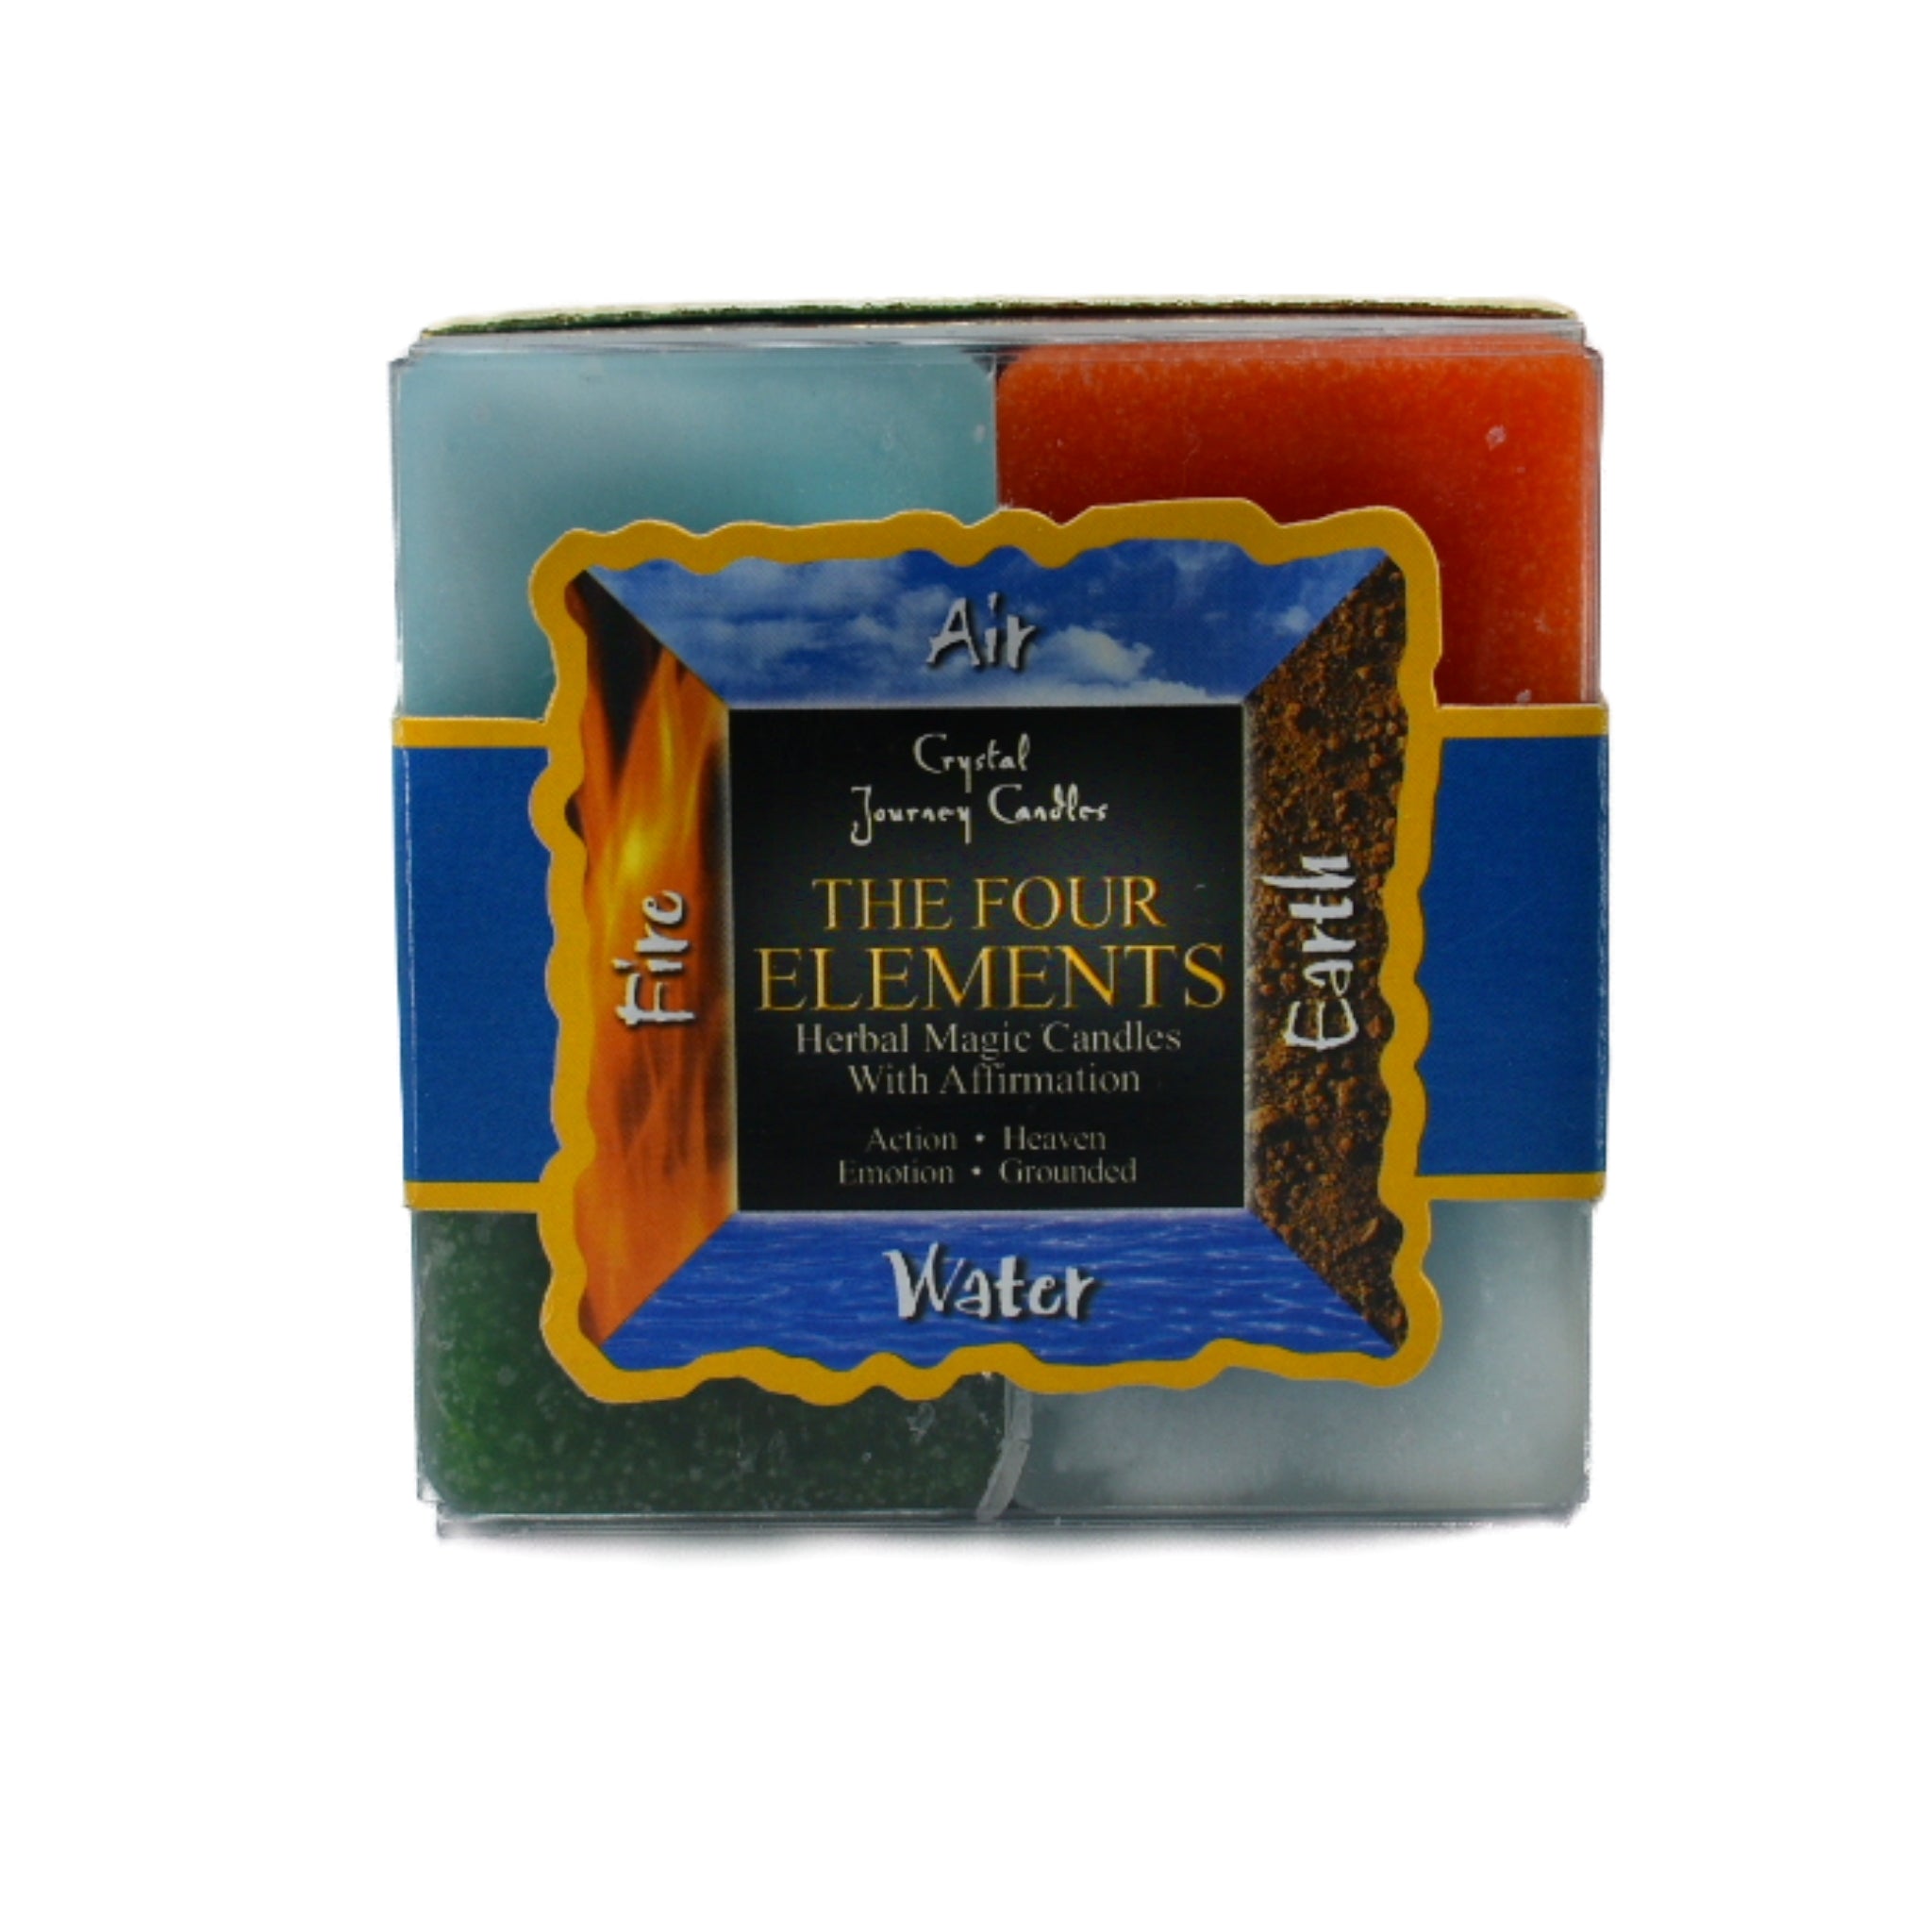 The Four Elements Square Pack Candle.  Uniquely created to embody one of the four basic elements of our universe.  Earth - Grounded, Fire - Action, Air - Heaven, and Water - Emotion .  One green, one red and two blue candles.